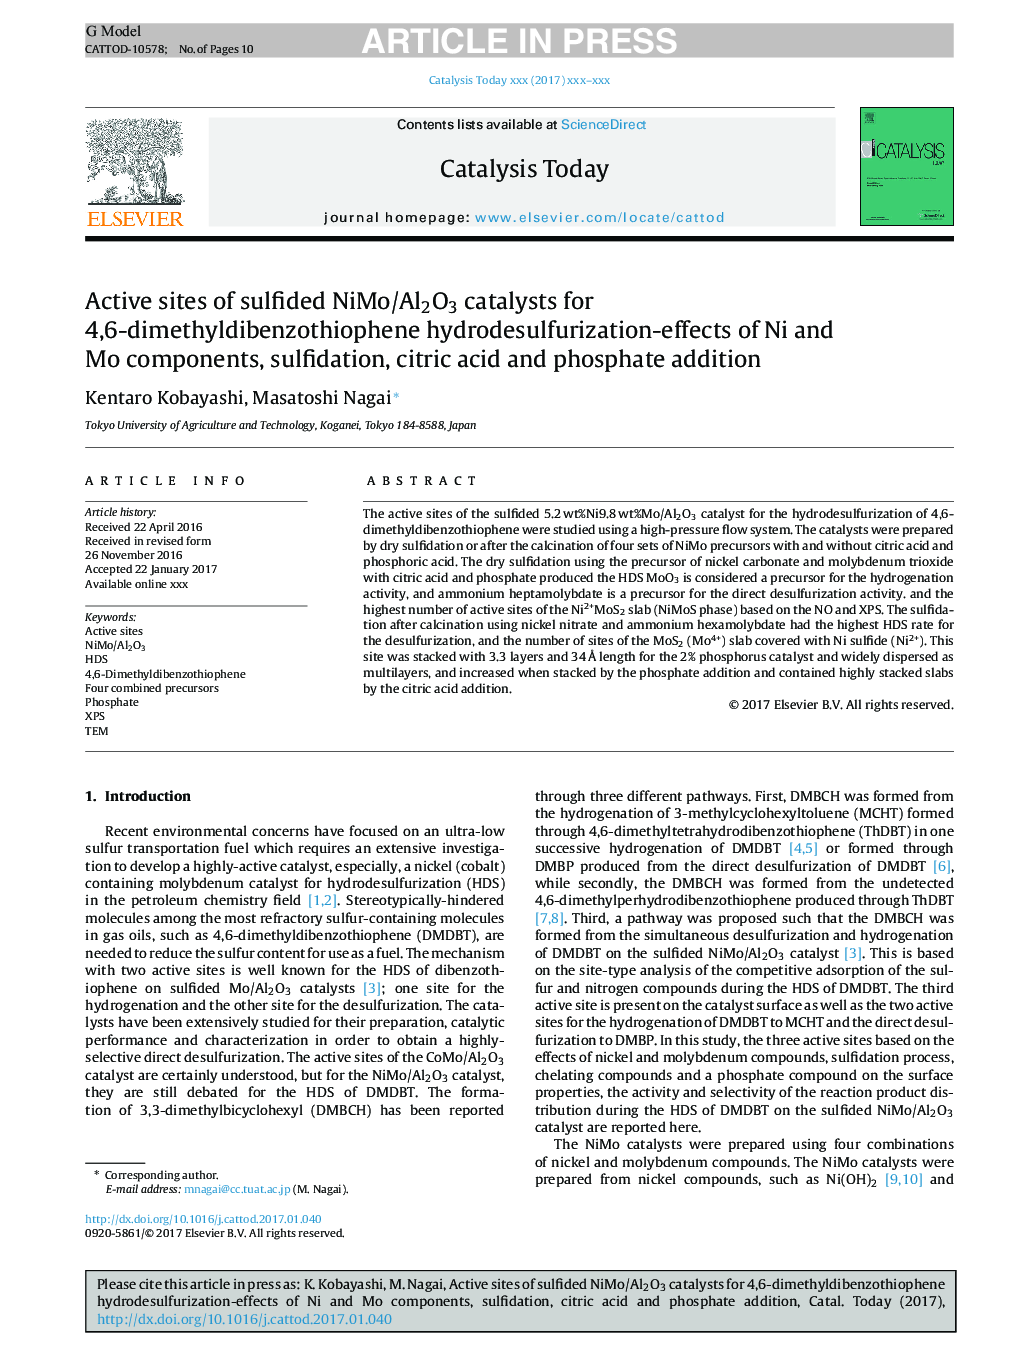 Active sites of sulfided NiMo/Al2O3 catalysts for 4,6-dimethyldibenzothiophene hydrodesulfurization-effects of Ni and Mo components, sulfidation, citric acid and phosphate addition